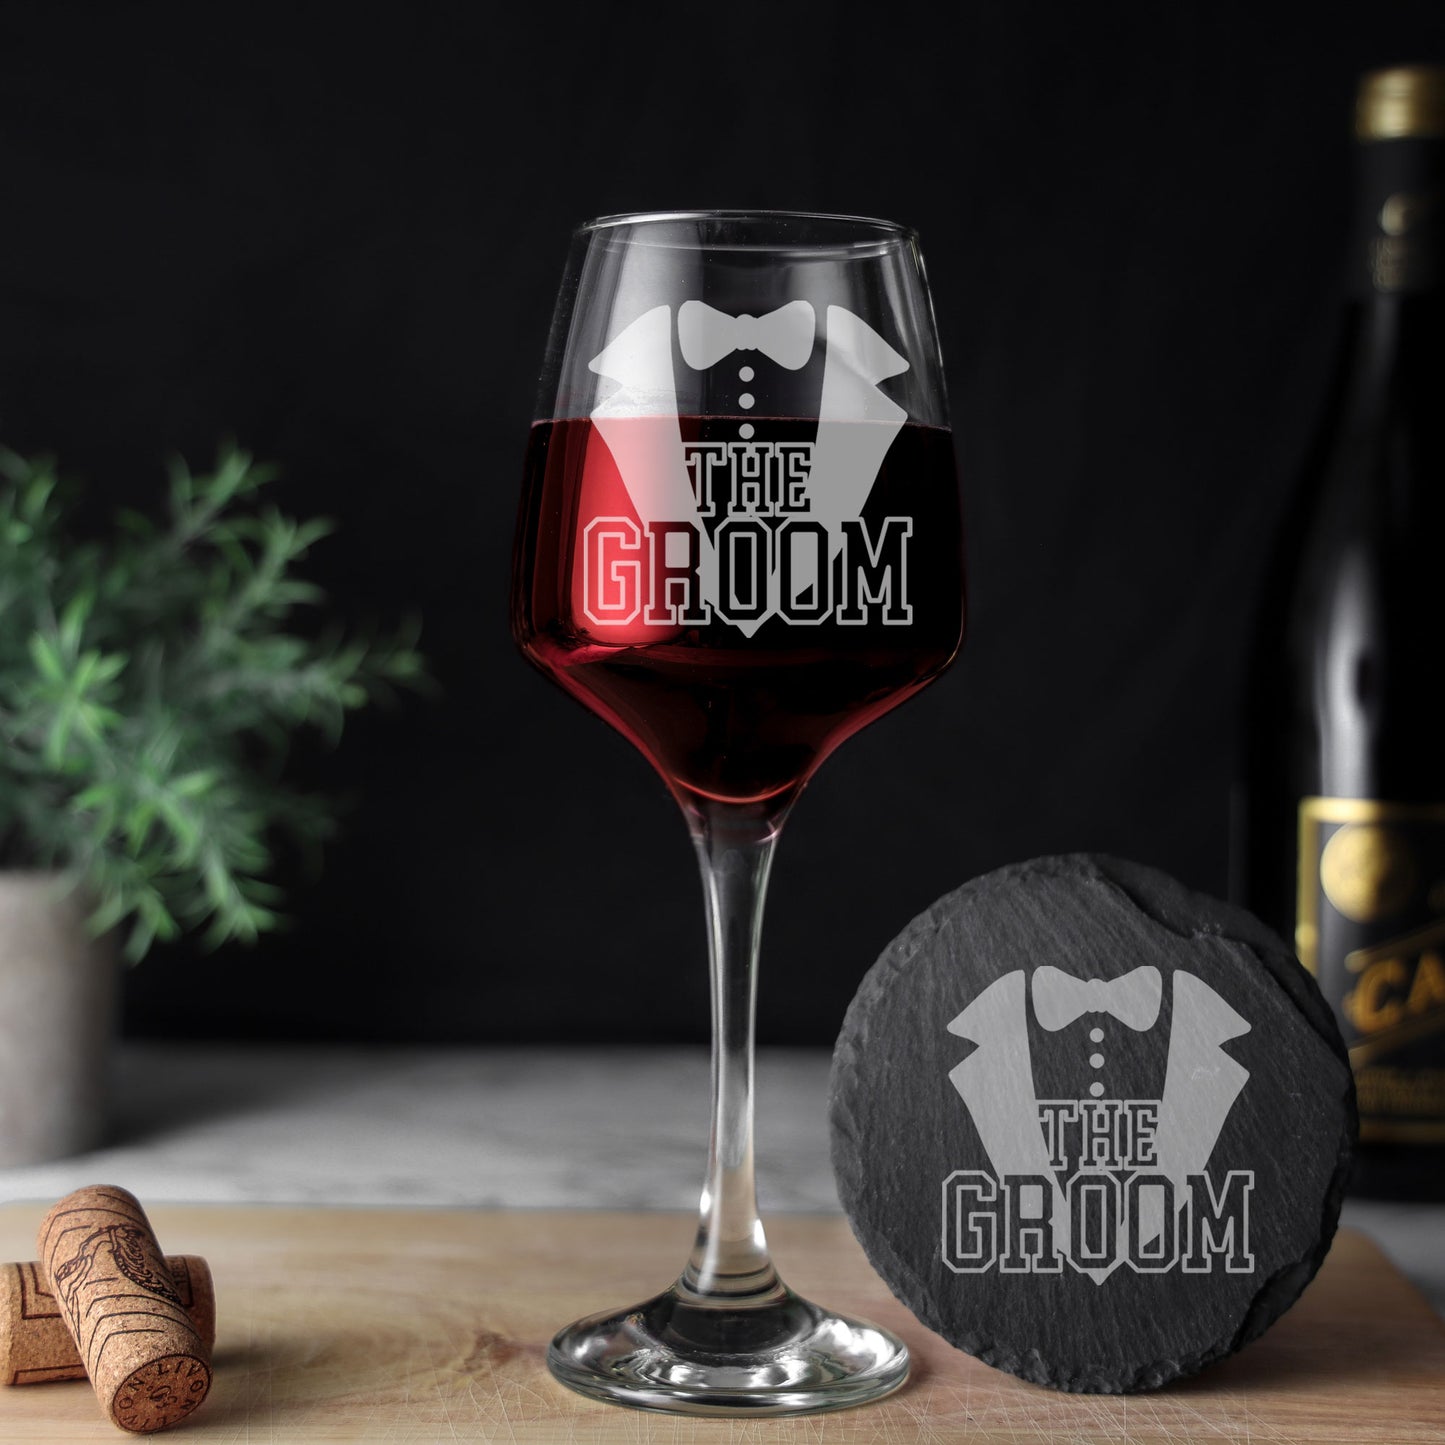 The Groom Engraved Wine Glass and/or Coaster Set  - Always Looking Good - Glass & Round Coaster Set  